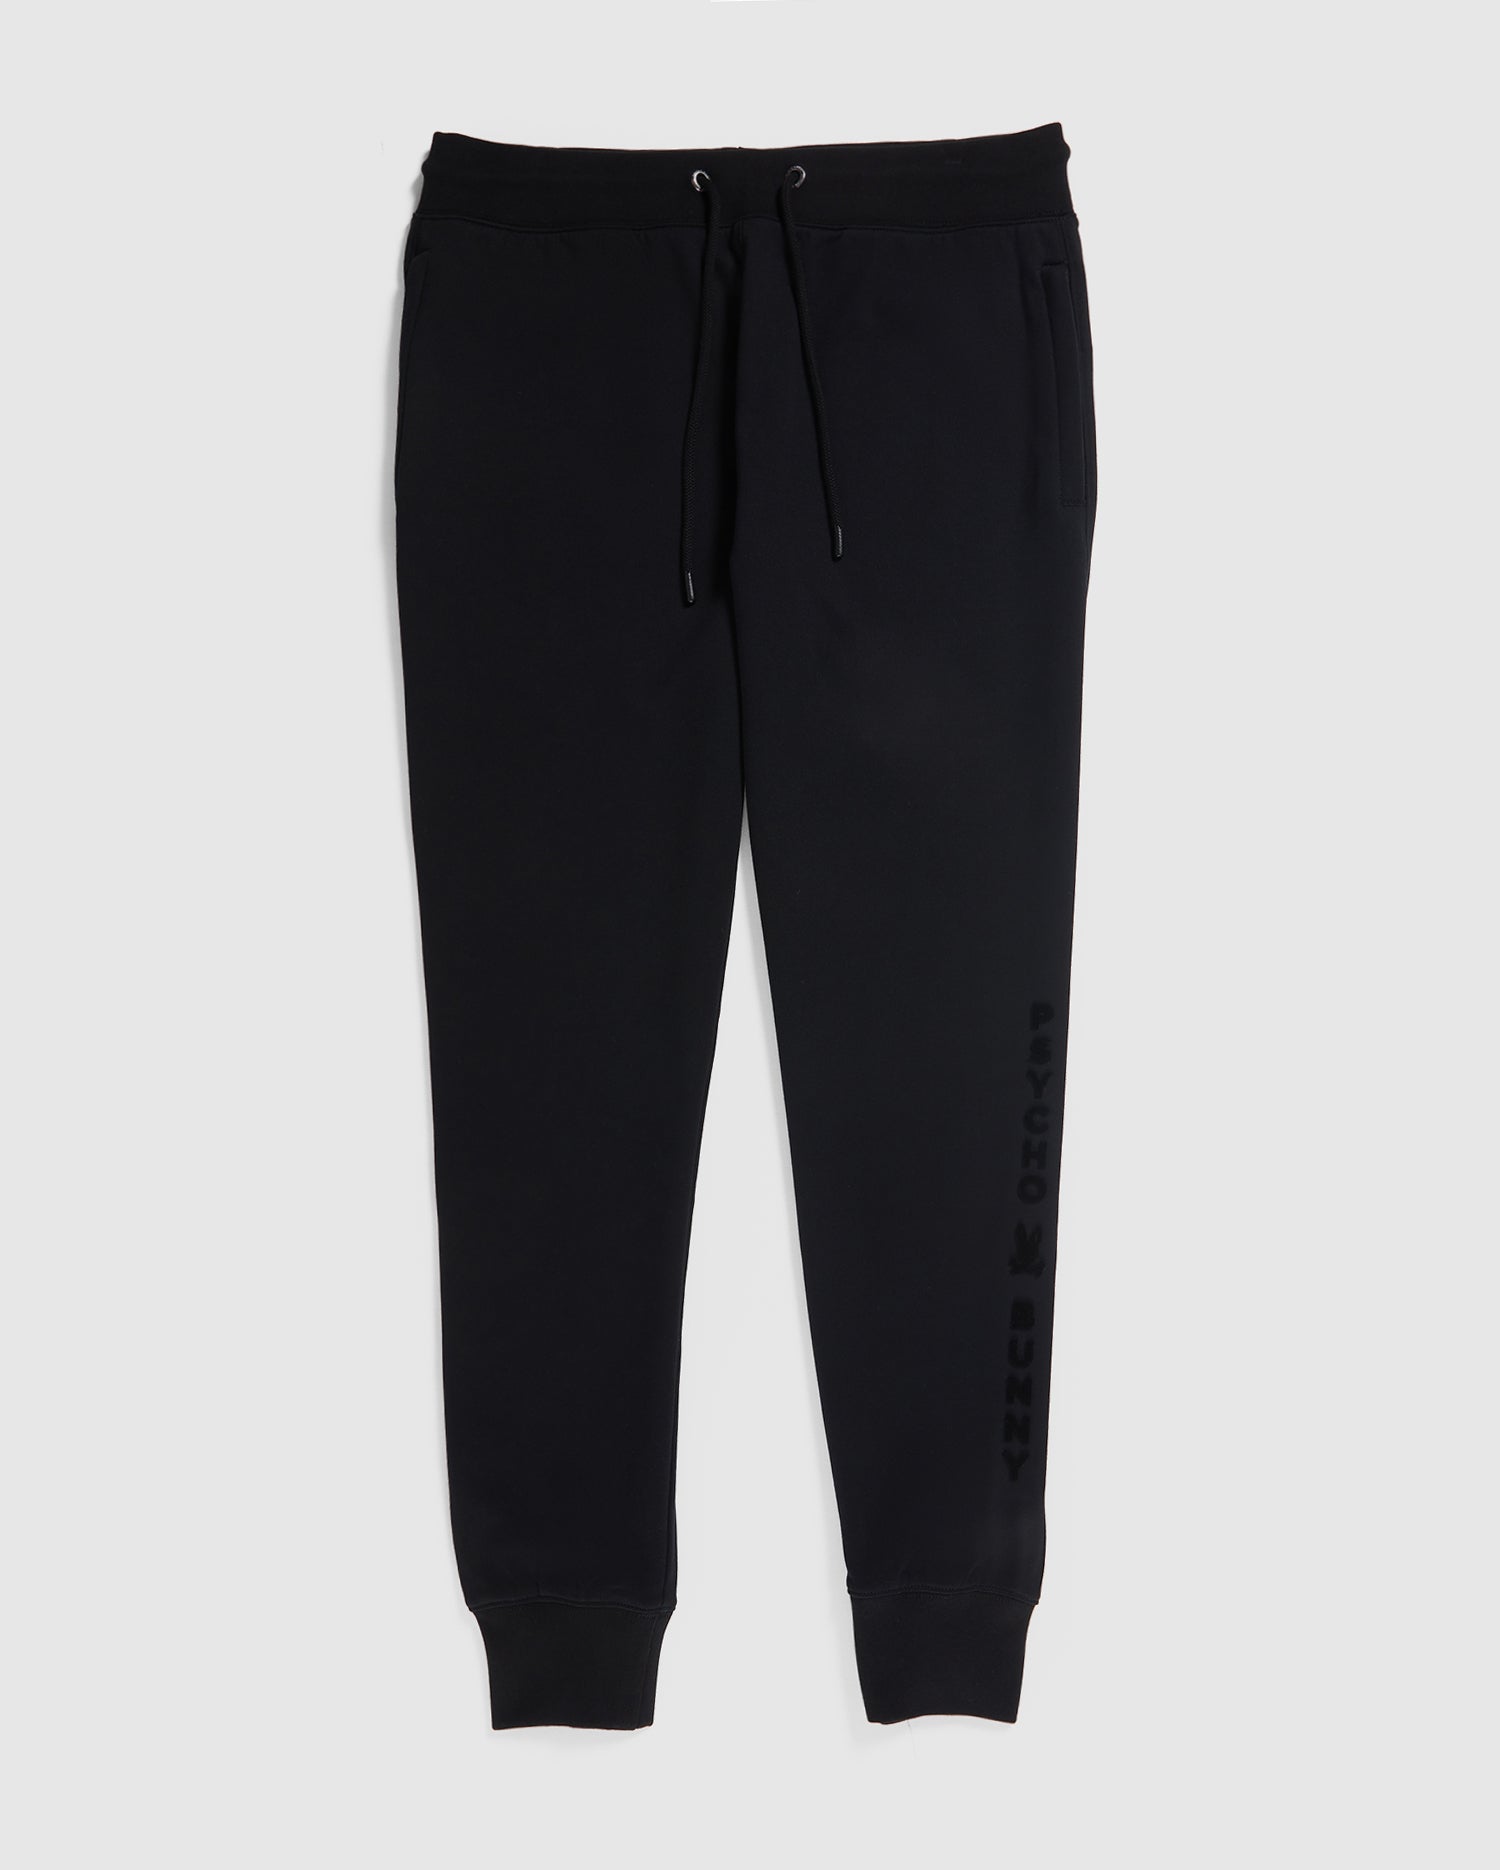 MENS ROYCE BLACK SWEATPANTS WITH ELASTIC ANKLE | PSYCHO BUNNY